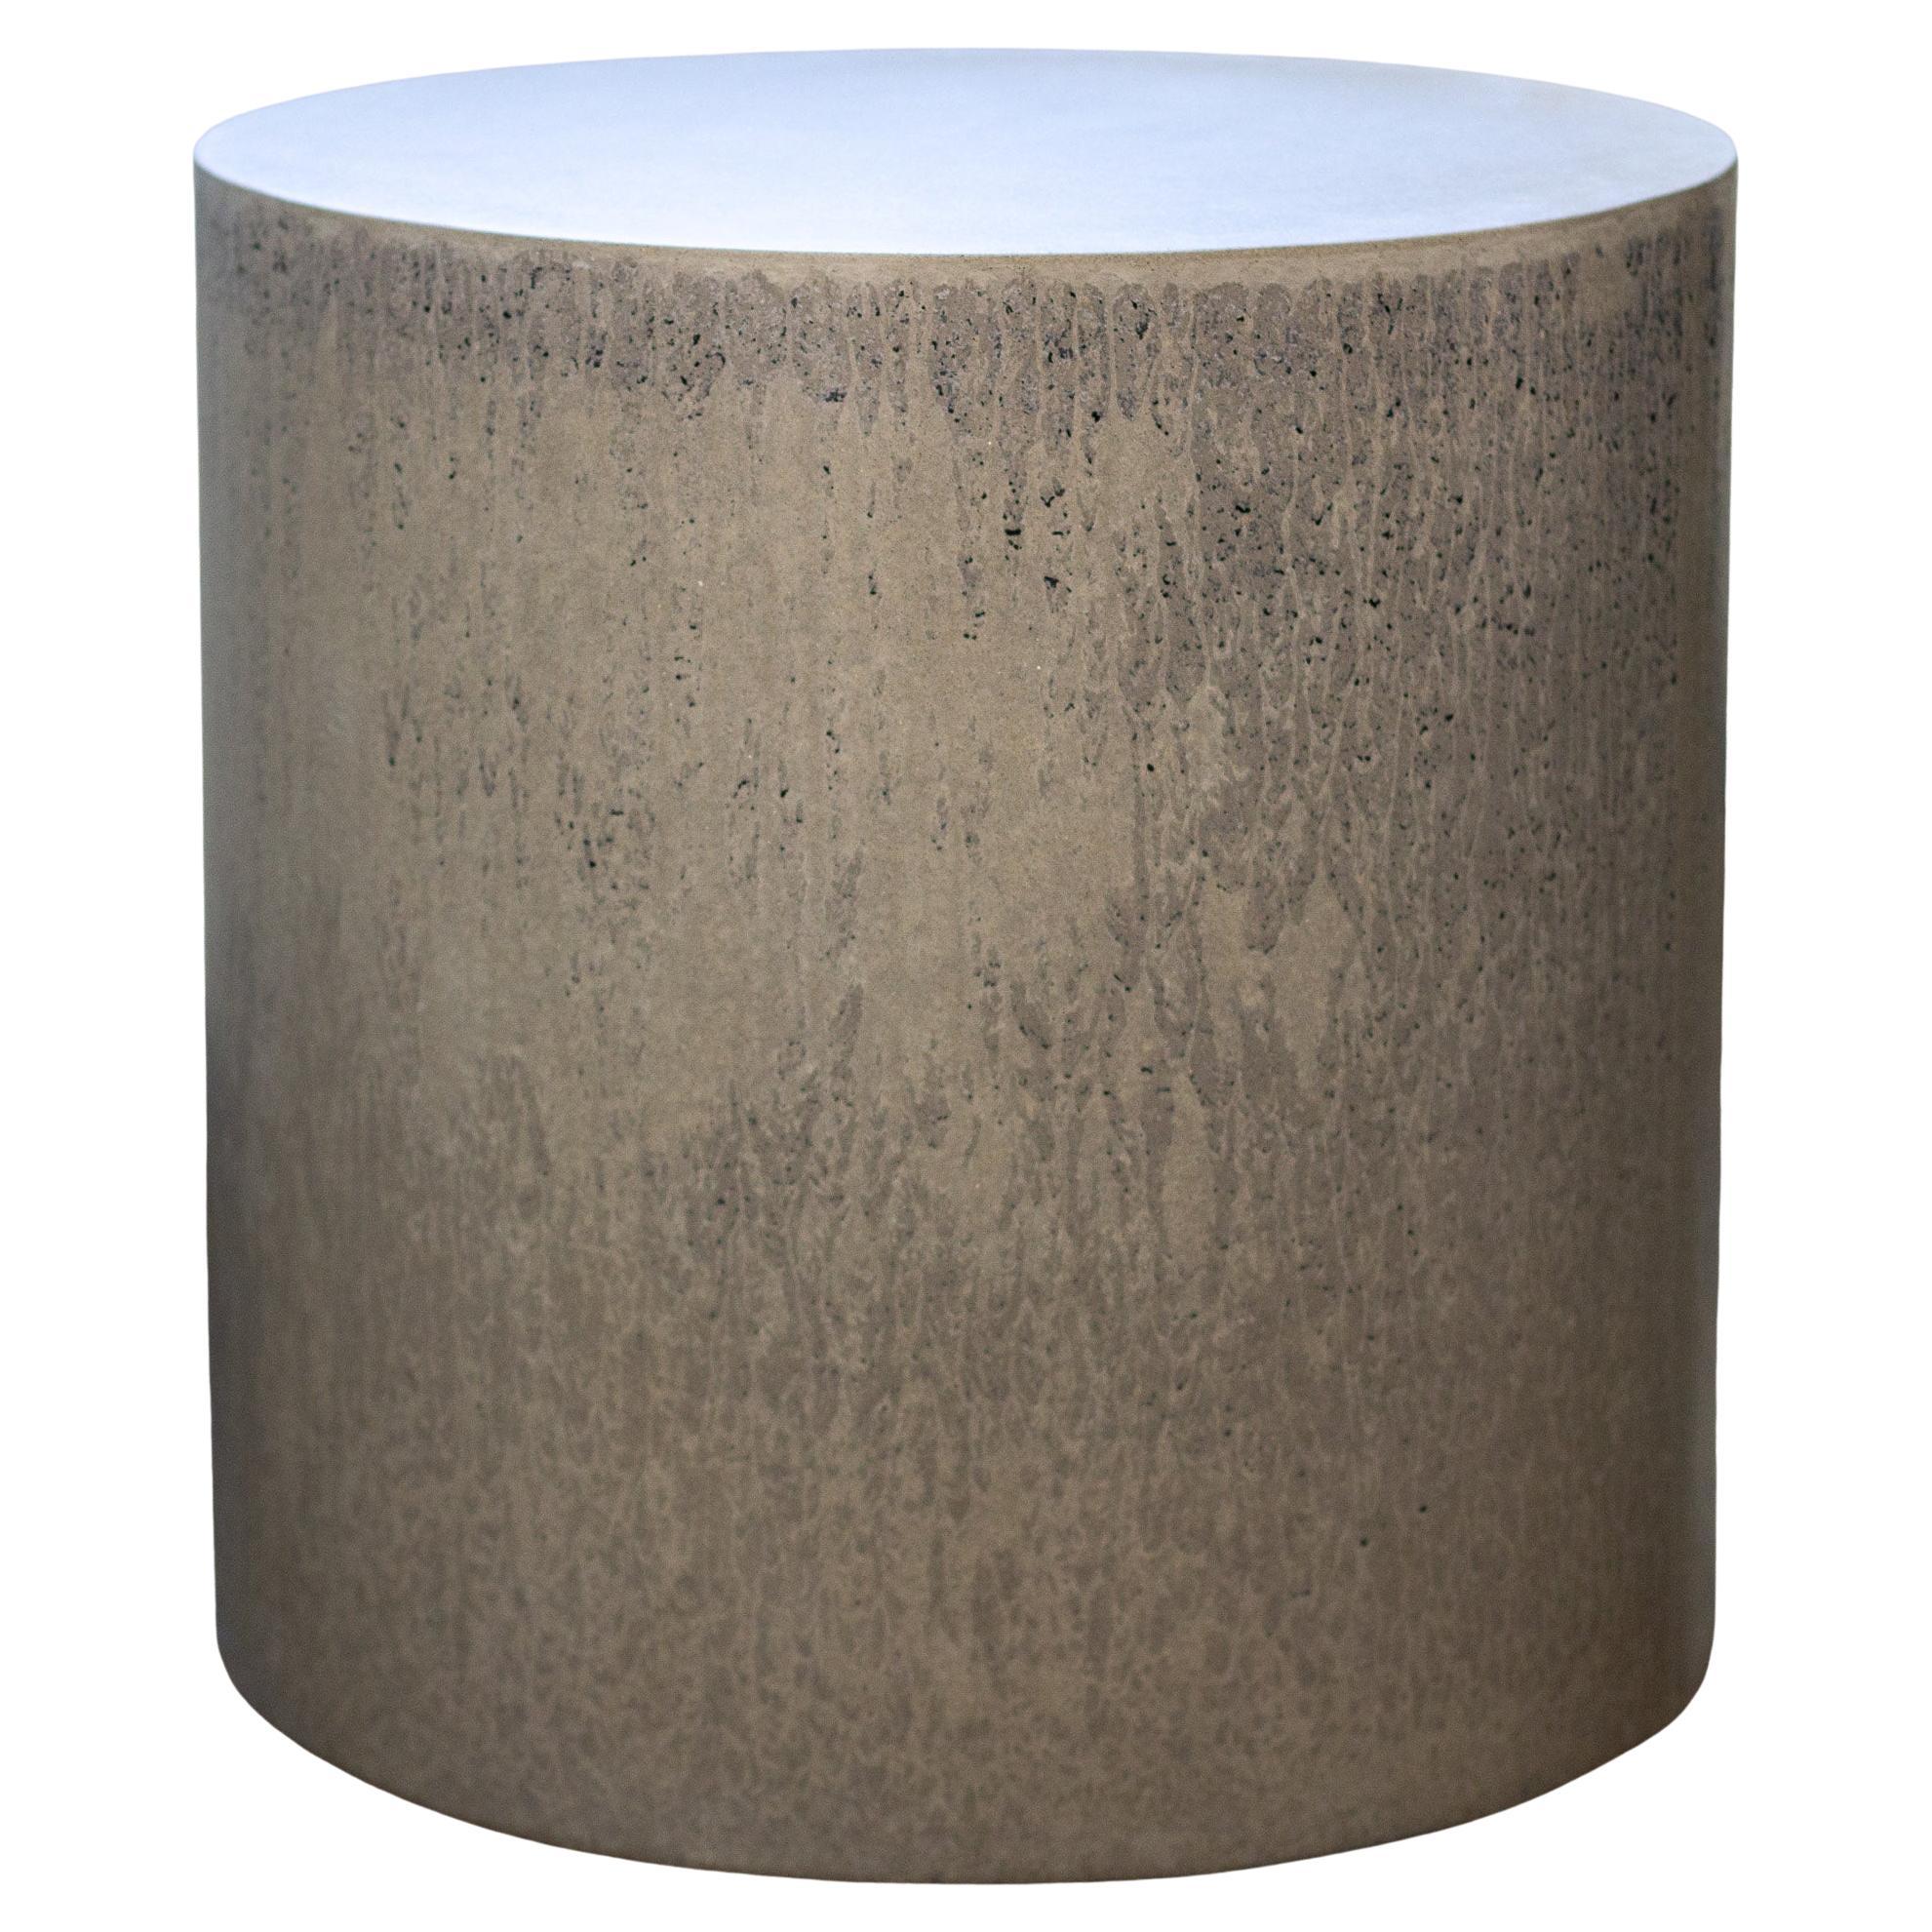 Concrete Cylinder, Drippy Grey by Dylan Myers 